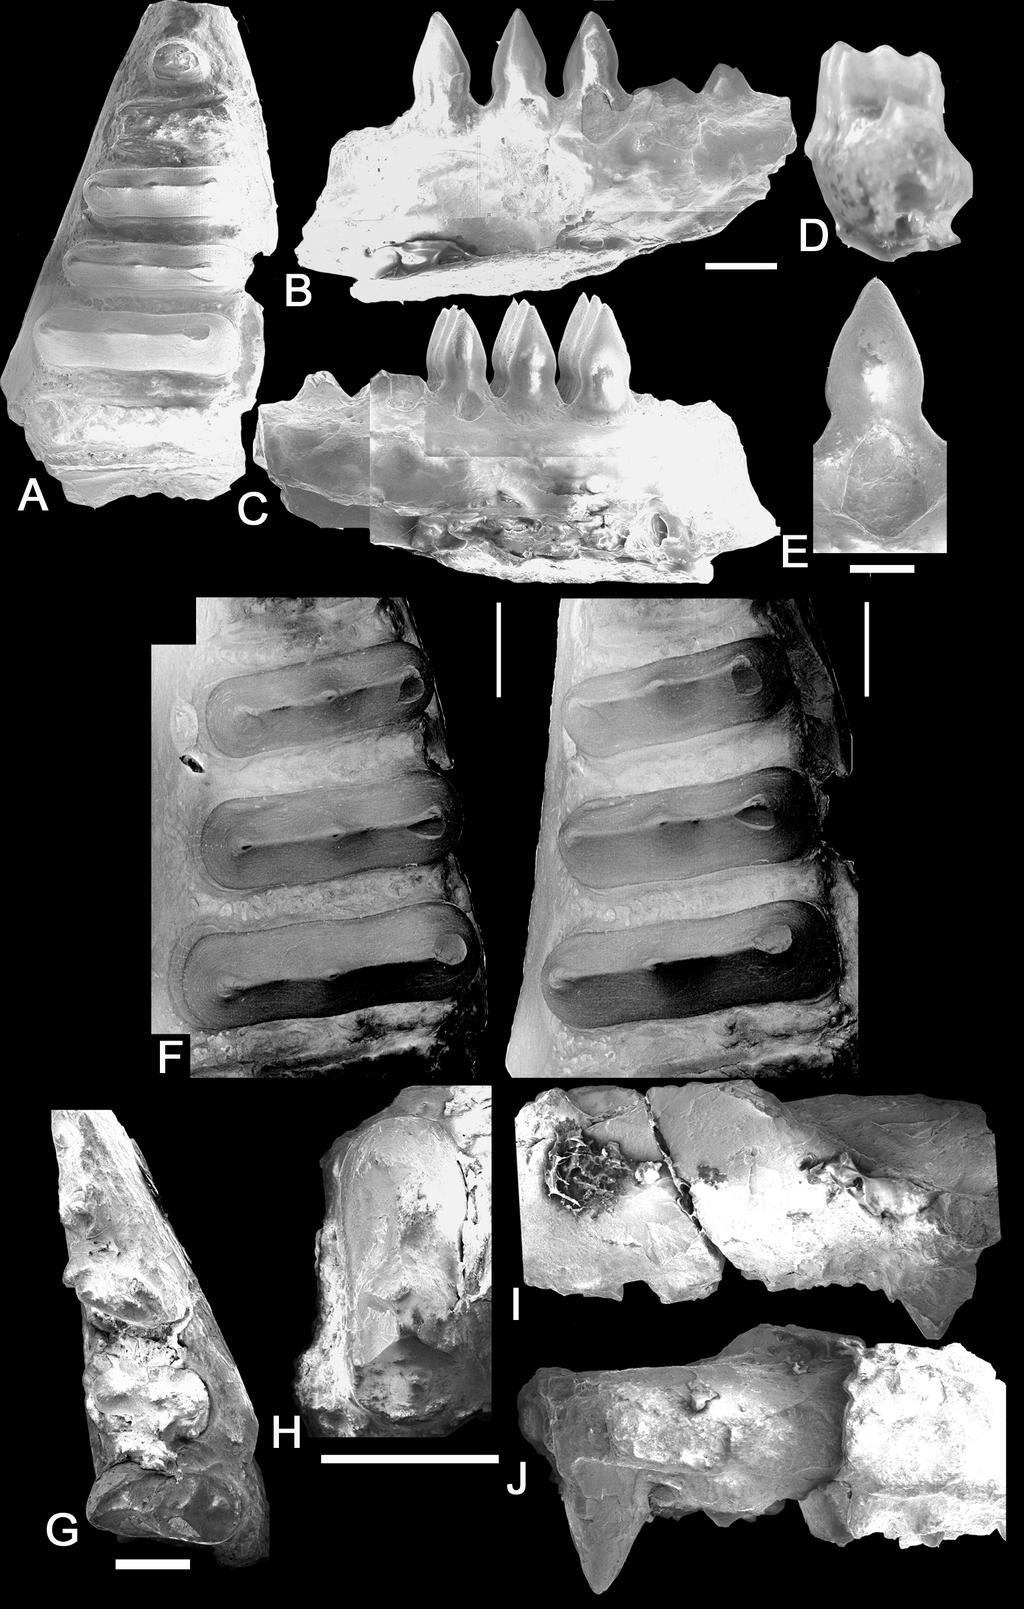 233 FIGURE 2. Holotypes of Trilophosaurus buettneri and T. jacobsi. A-E, Scanning electron micrographs of UMMP 2338, holotype right dentary of Trilophosaurus buettneri Case, UMMP 2338.